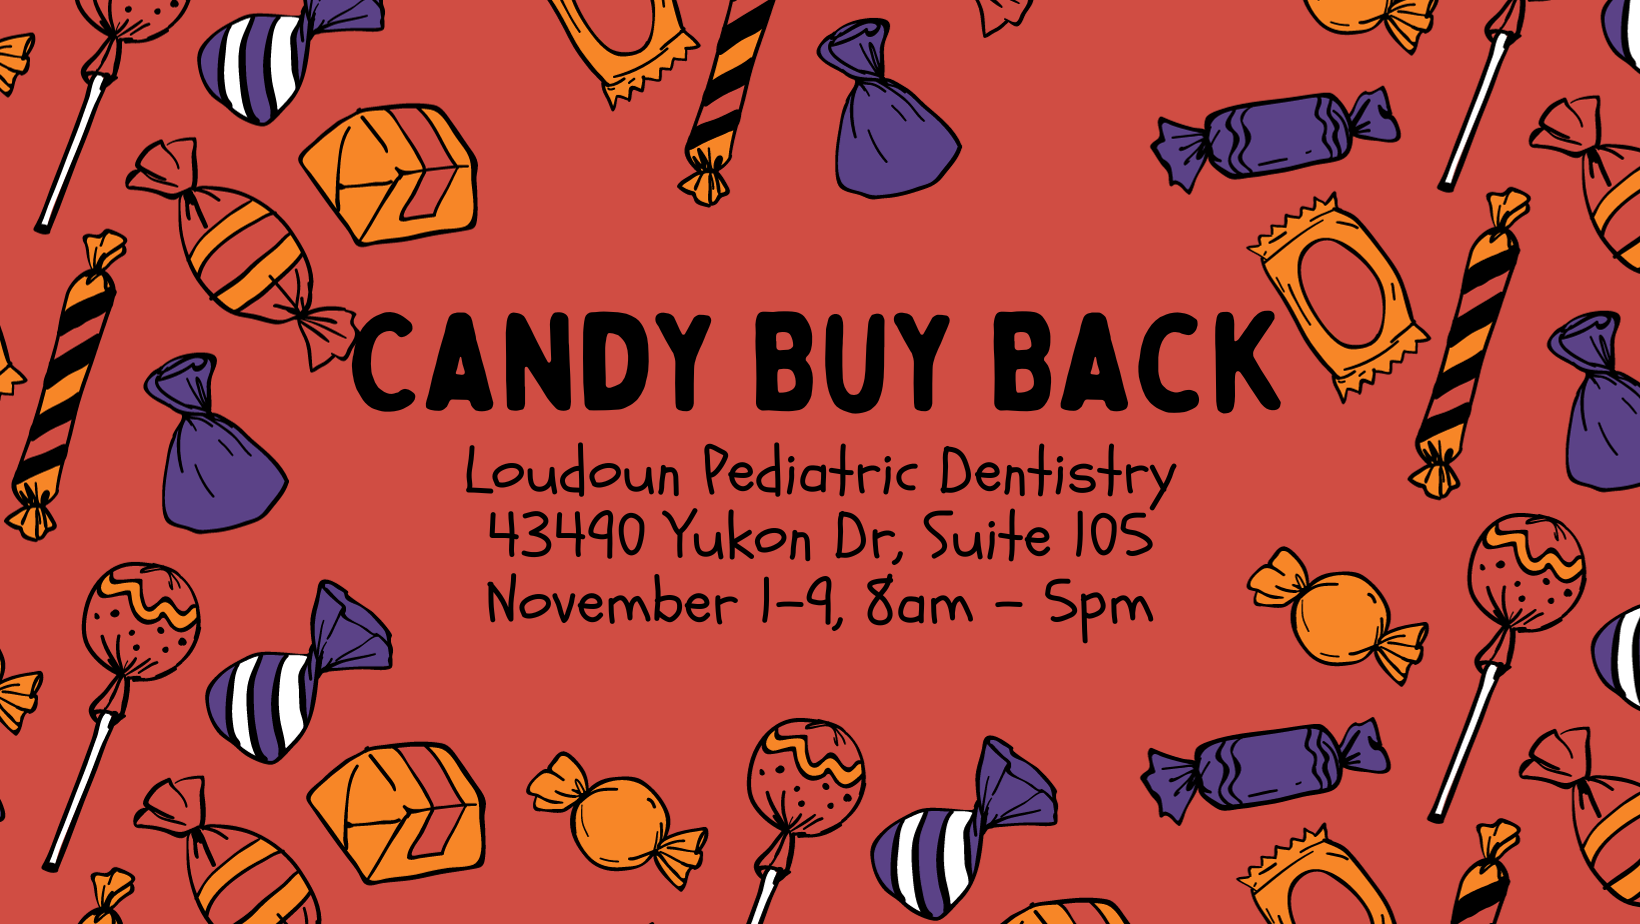 Loudoun Pediatric Dentistry’s Annual Halloween Candy Give-Back!